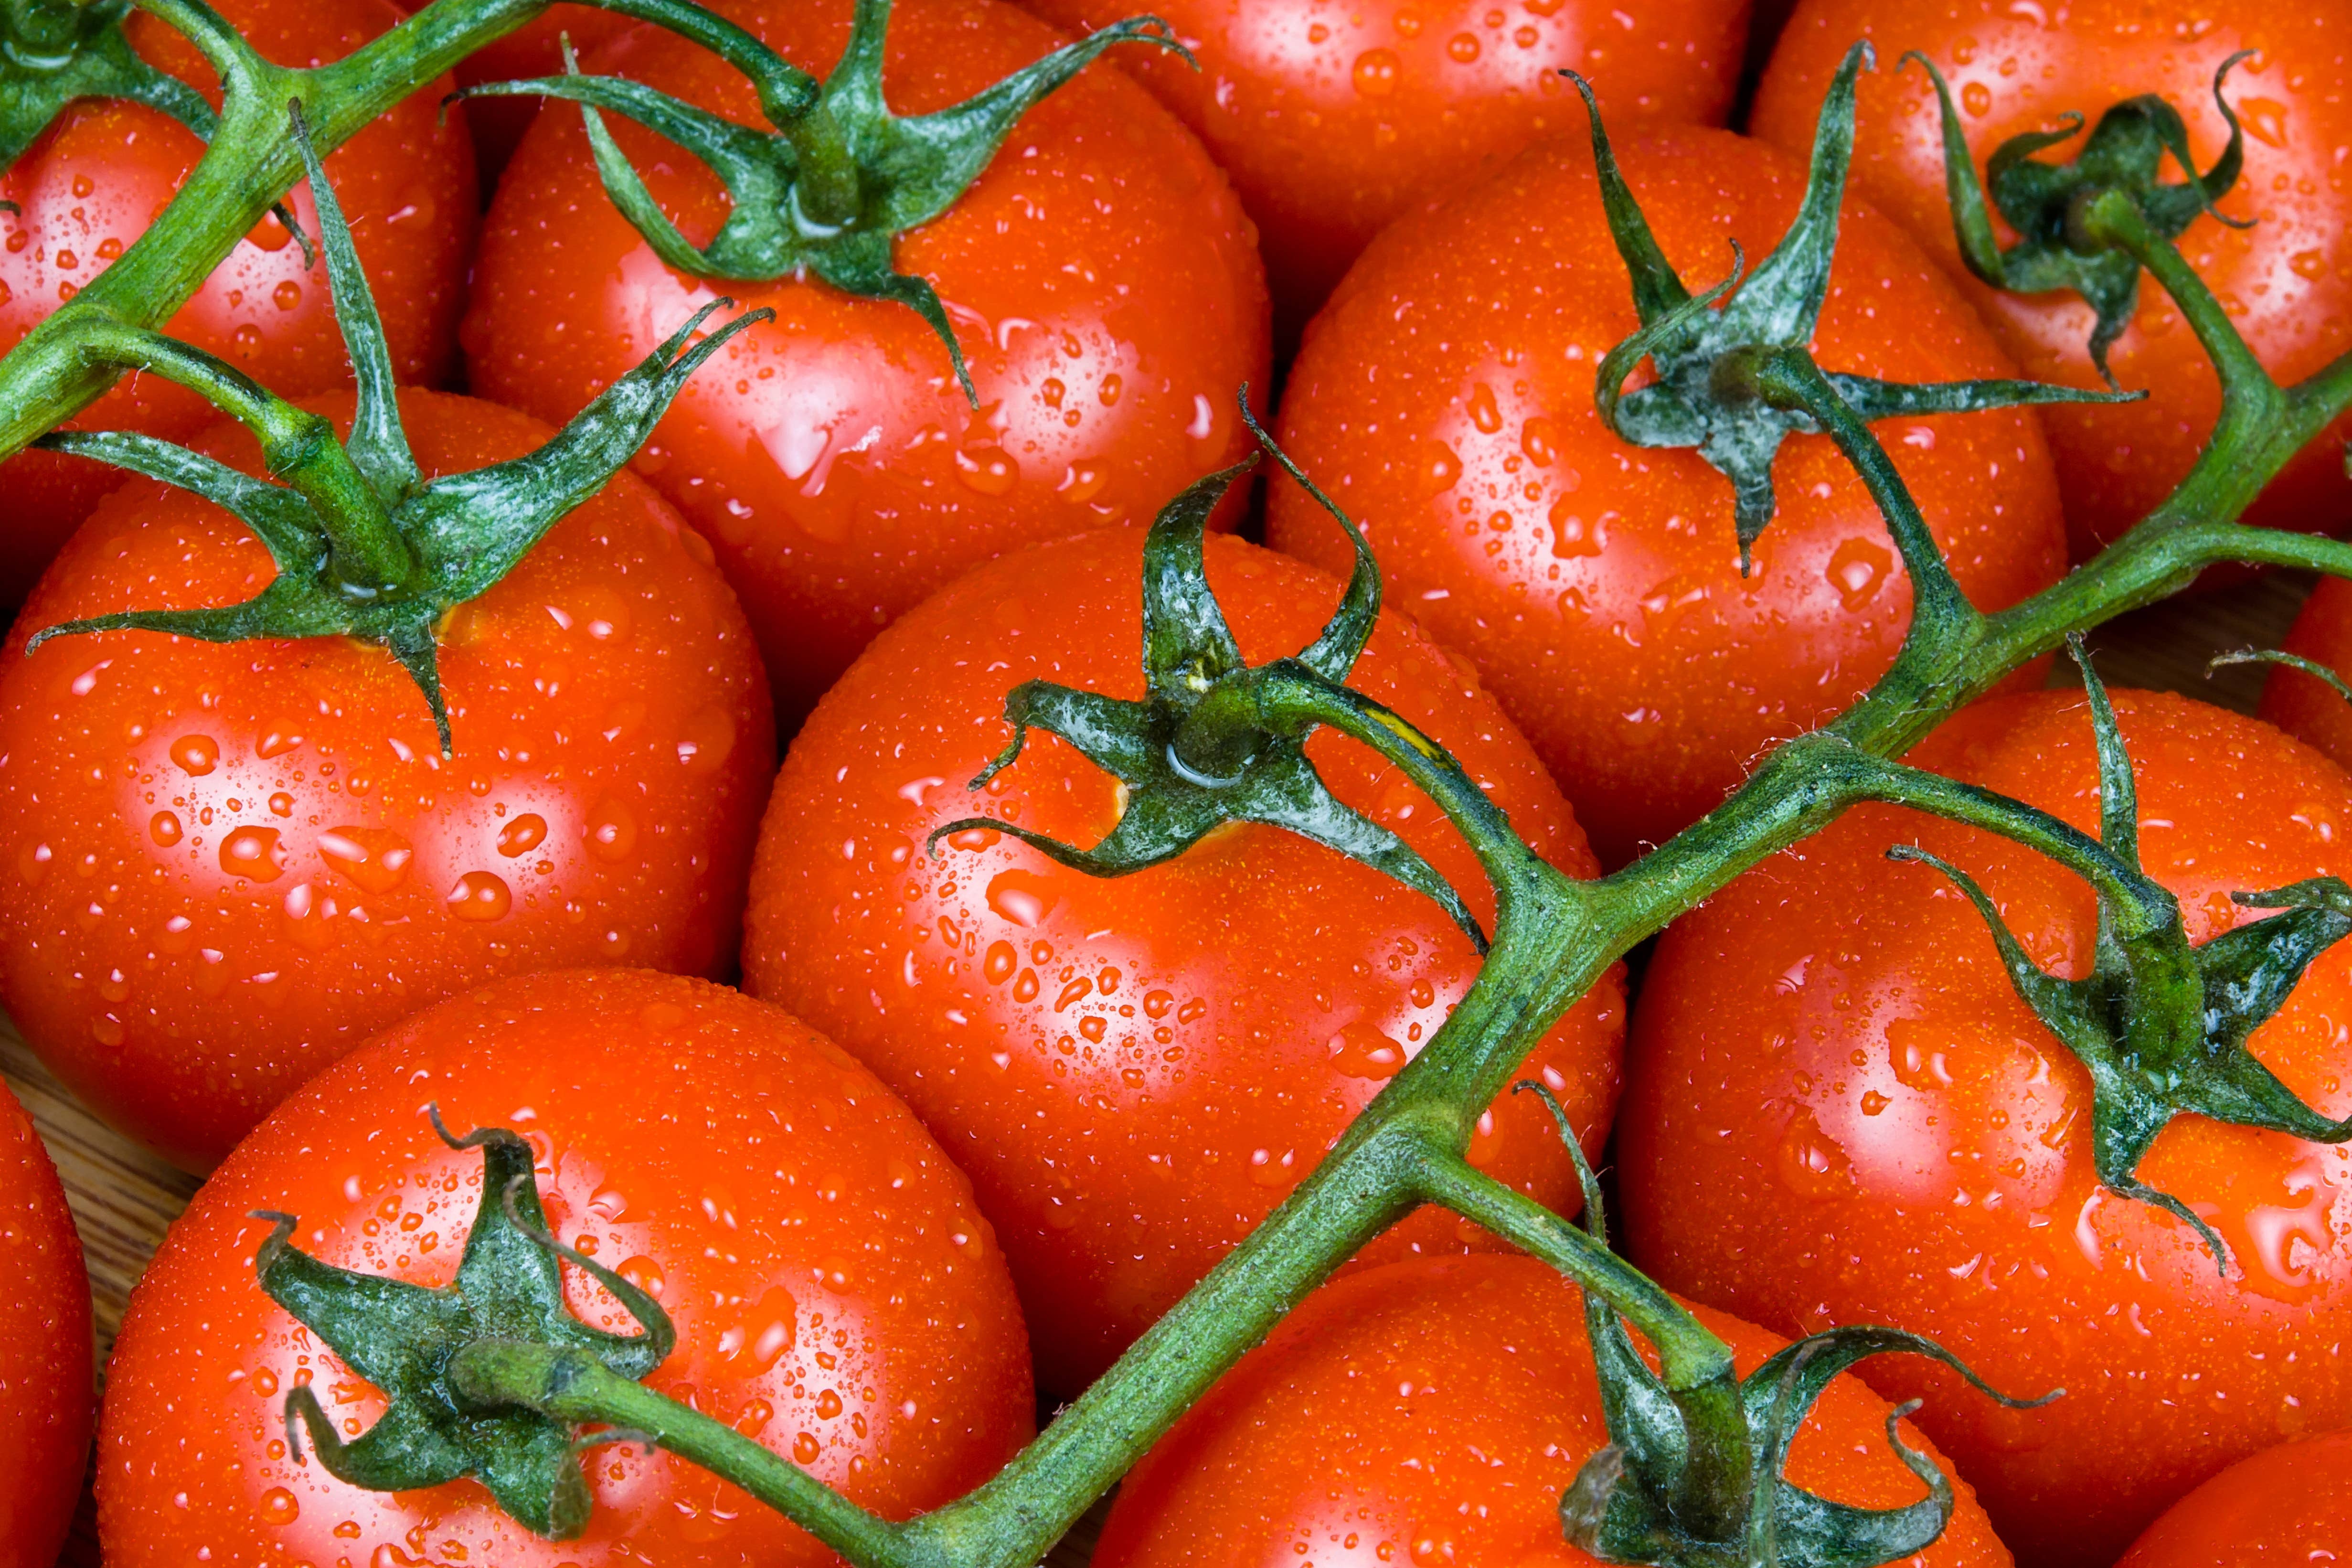 Shortage of tomatoes widening to more products and likely to last